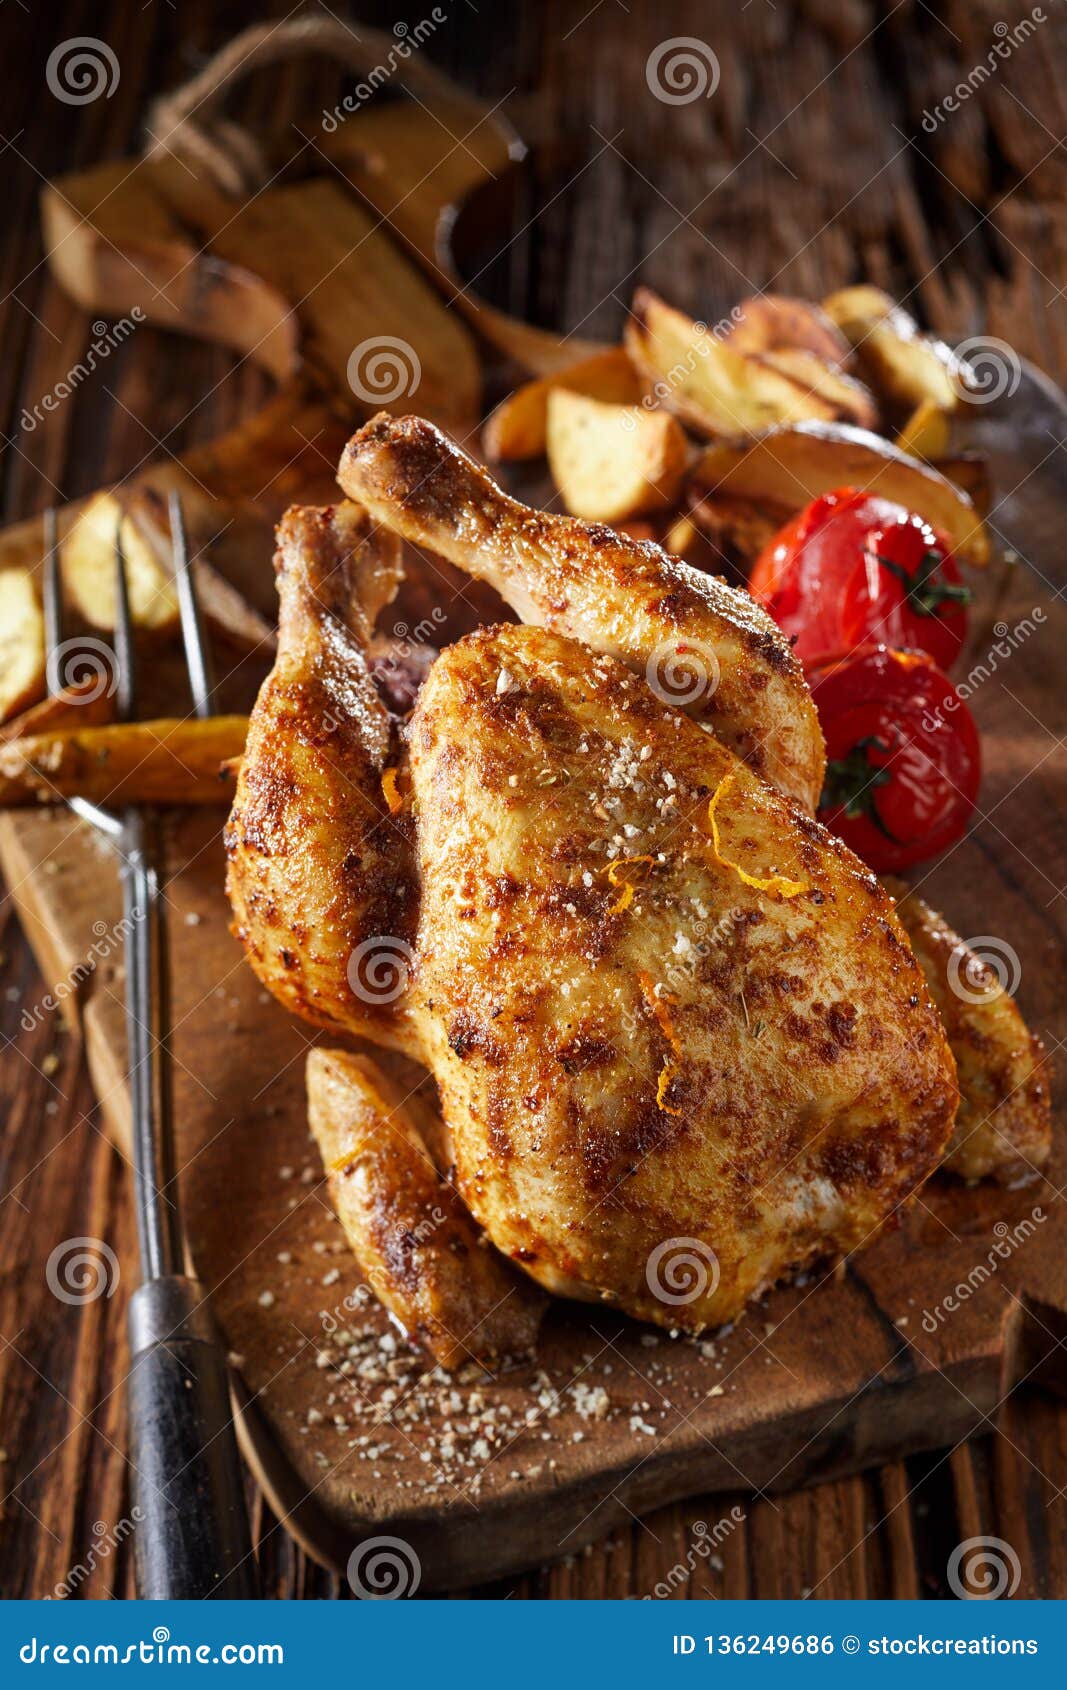 grilled poussin or spring chicken